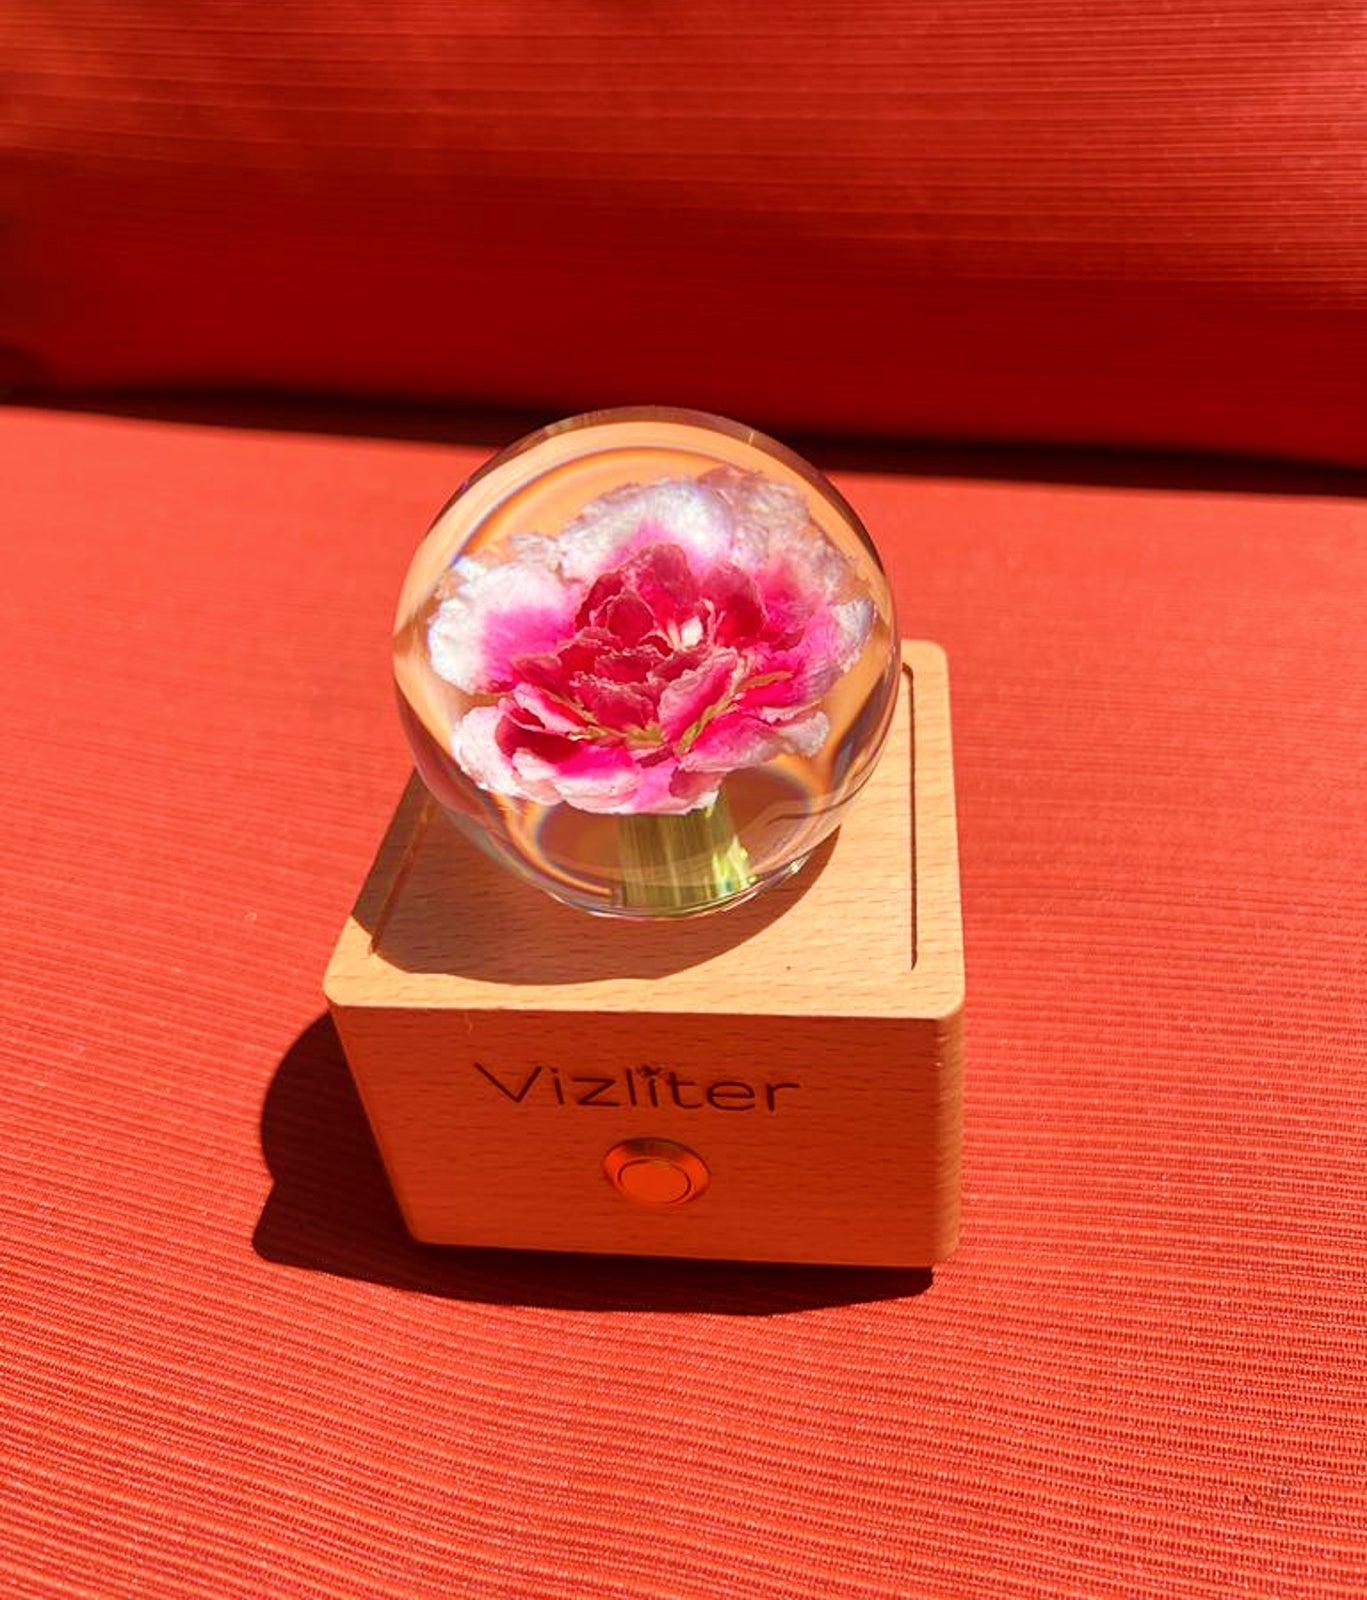 Bluetooth Speakers Crystal Ball LED Light Preserved Fresh Flower with Wood Base Night Light Pink Carnation